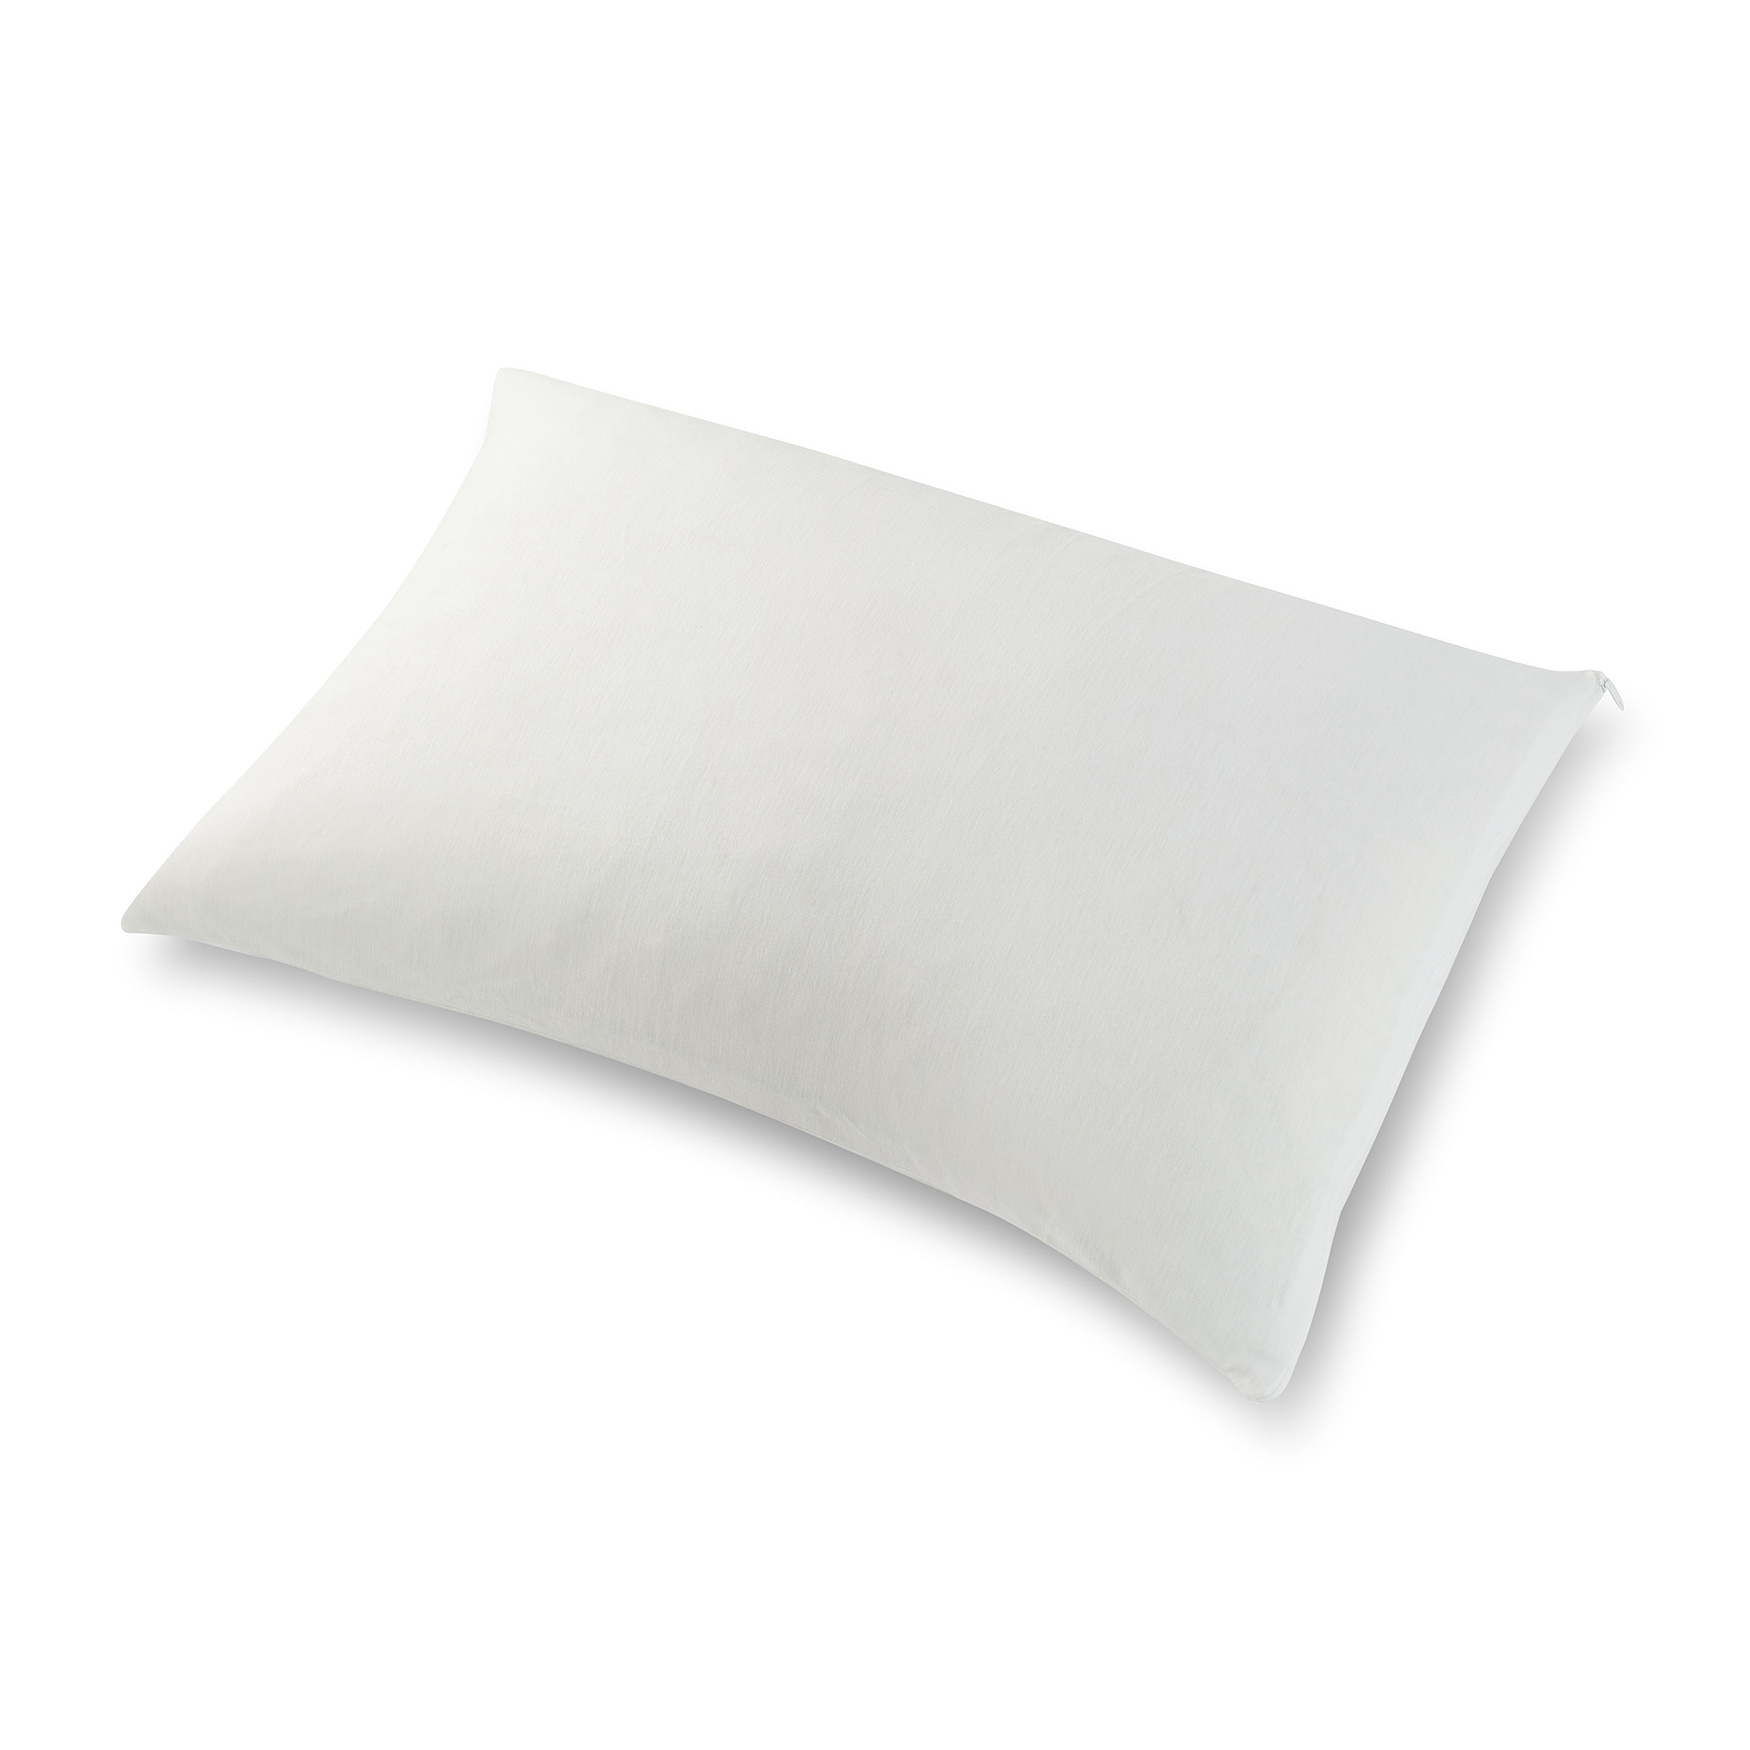 All-In-One Cooling Bamboo Sleep Pillow, Standard, 